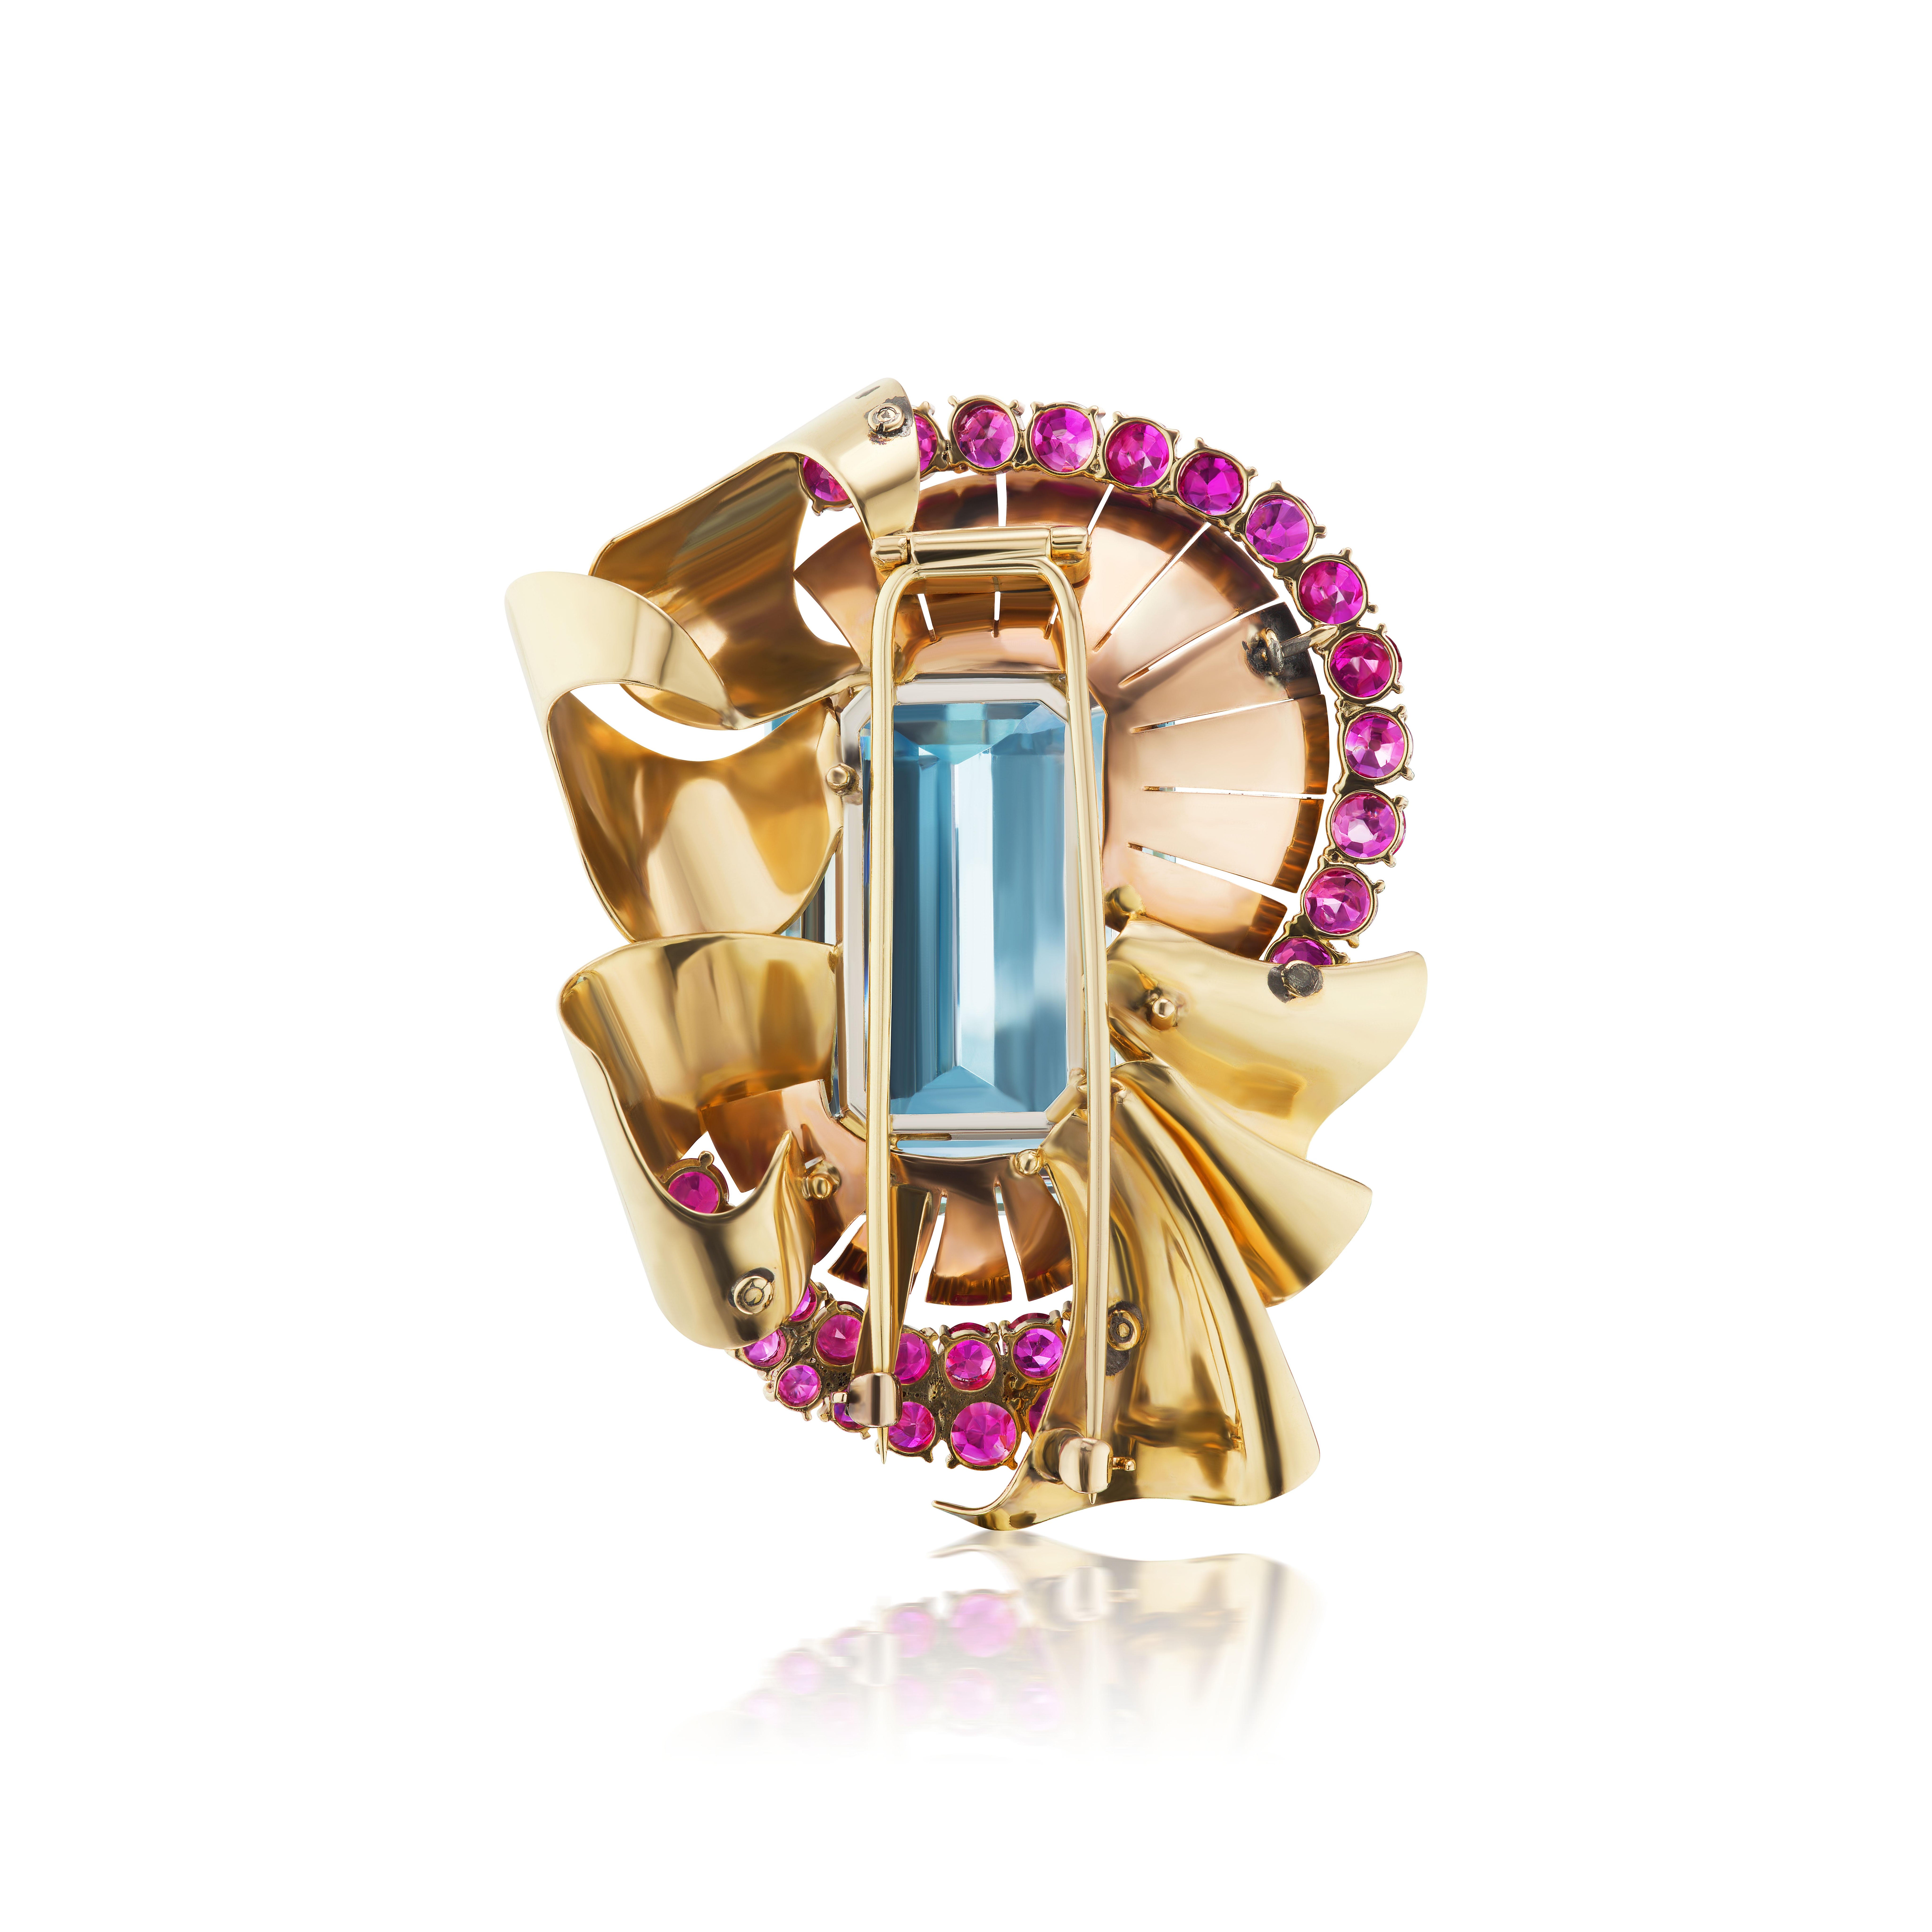 A beautiful large emerald cut aquamarine weighing 110.24 carats set with 27 round rubies in a festive gold plated retro brooch. Lovely and bold.